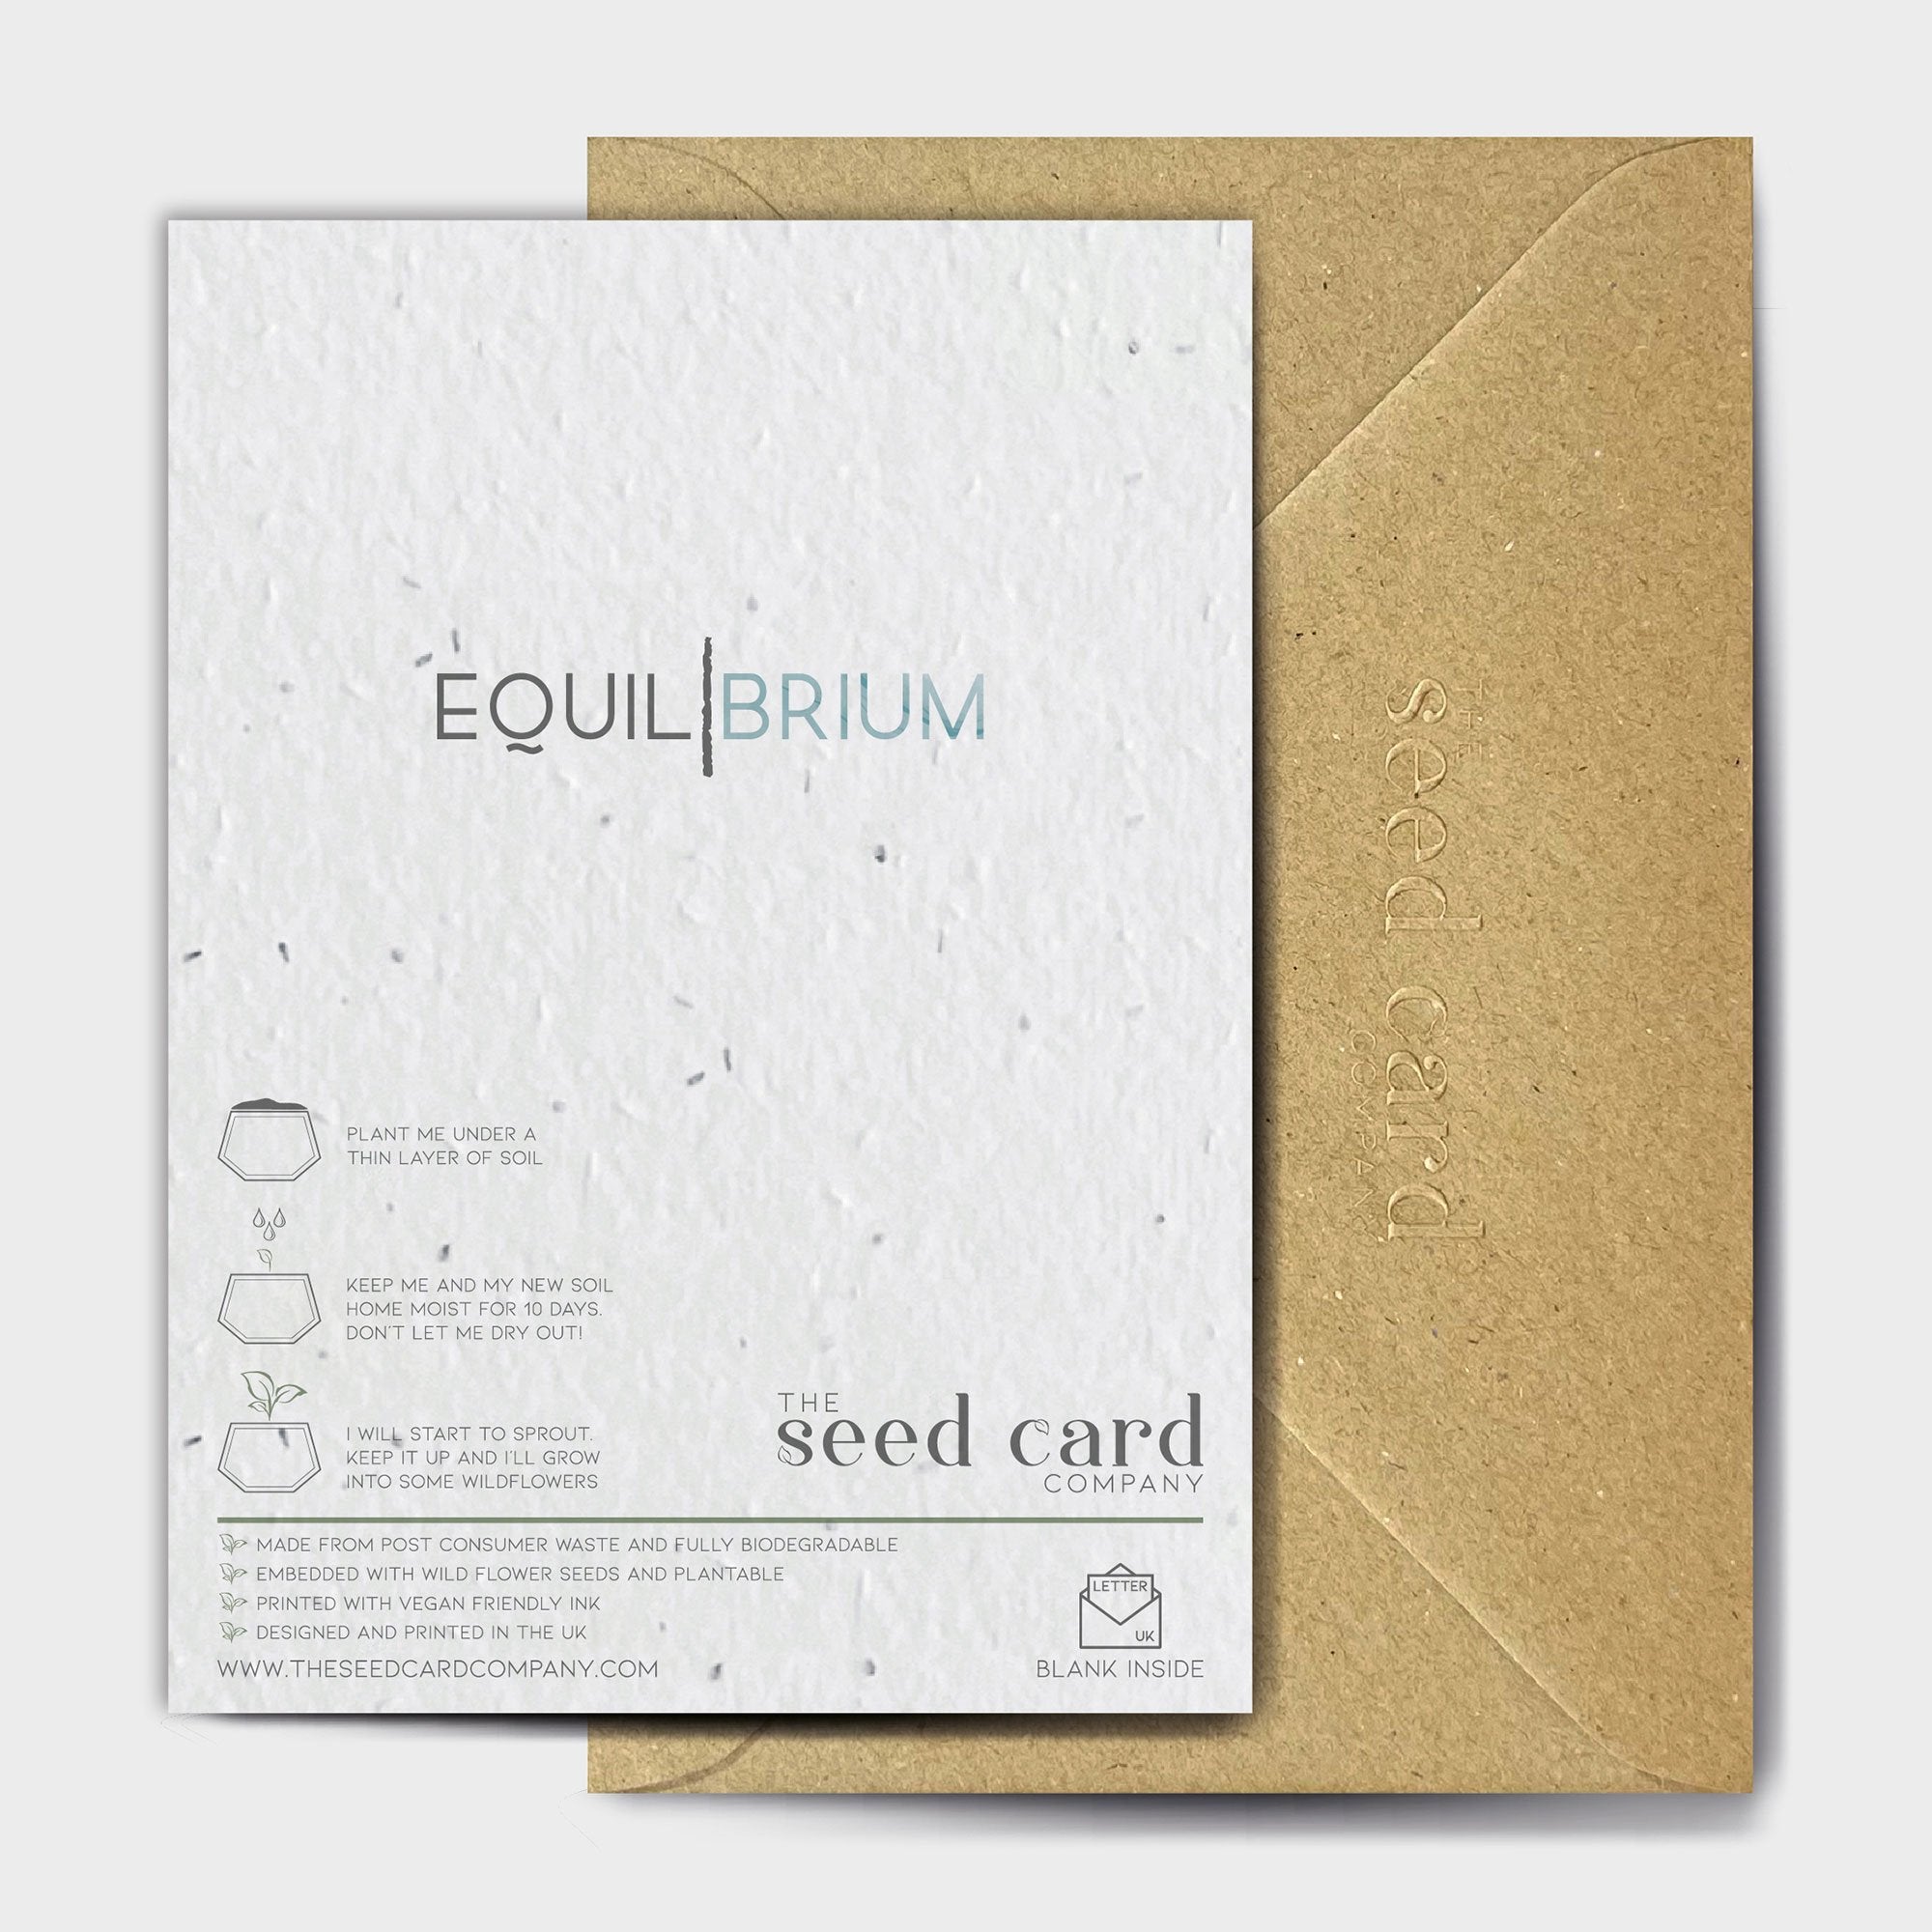 Shop online Benefits of Both - 100% biodegradable seed-embedded cards Shop -The Seed Card Company